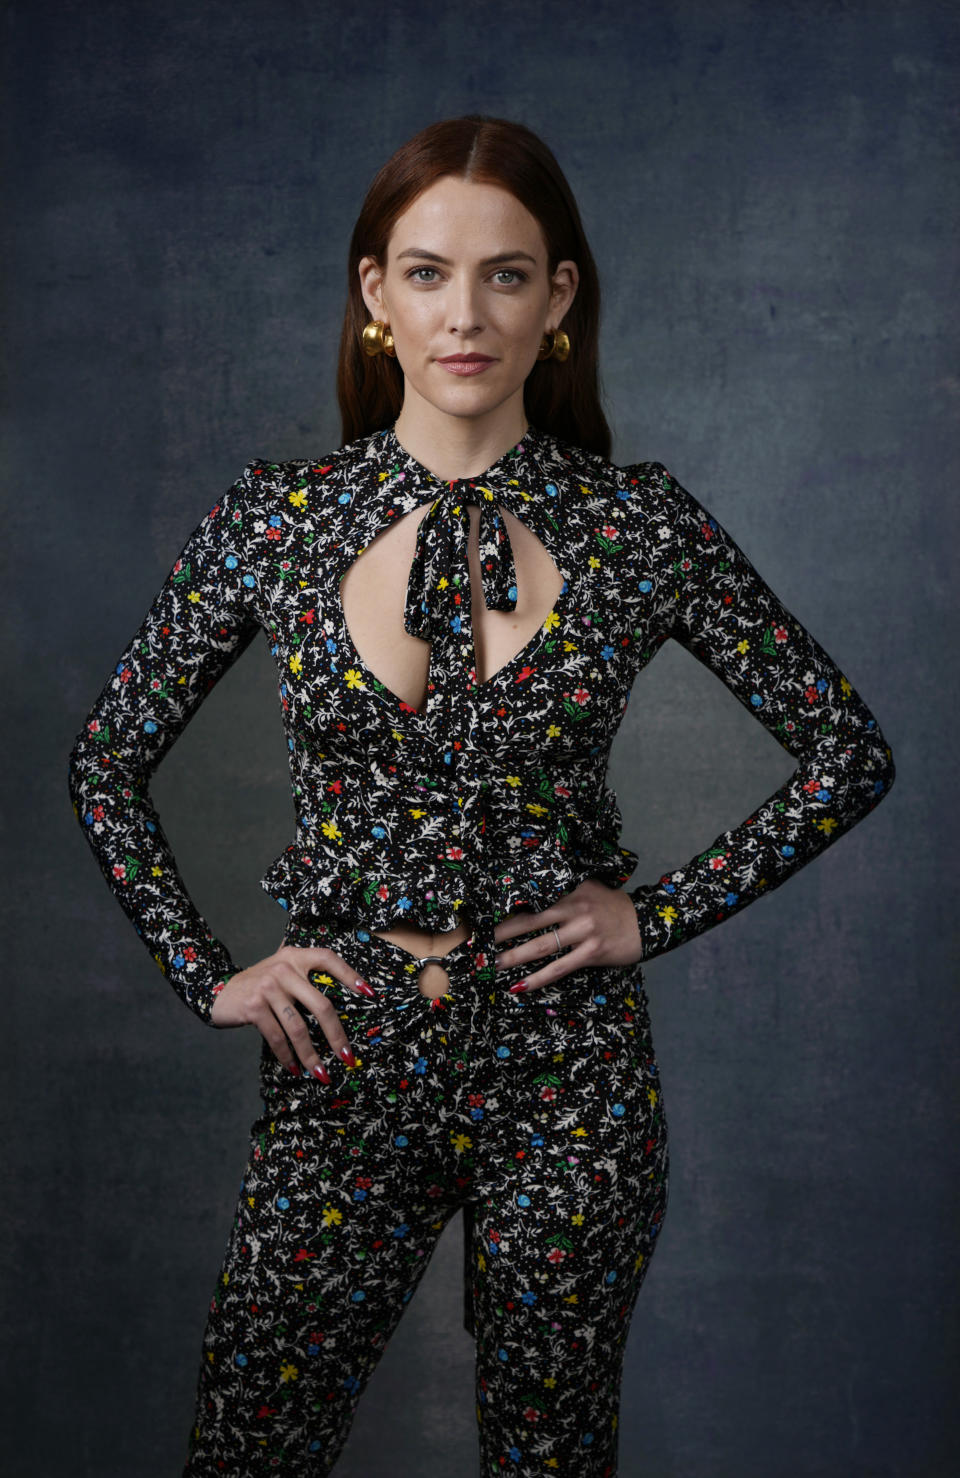 Riley Keough, a cast member in the streaming miniseries "Daisy Jones and the Six," poses for a portrait at the Four Seasons Hotel, Tuesday, Feb. 21, 2023, in Los Angeles. (AP Photo/Chris Pizzello)